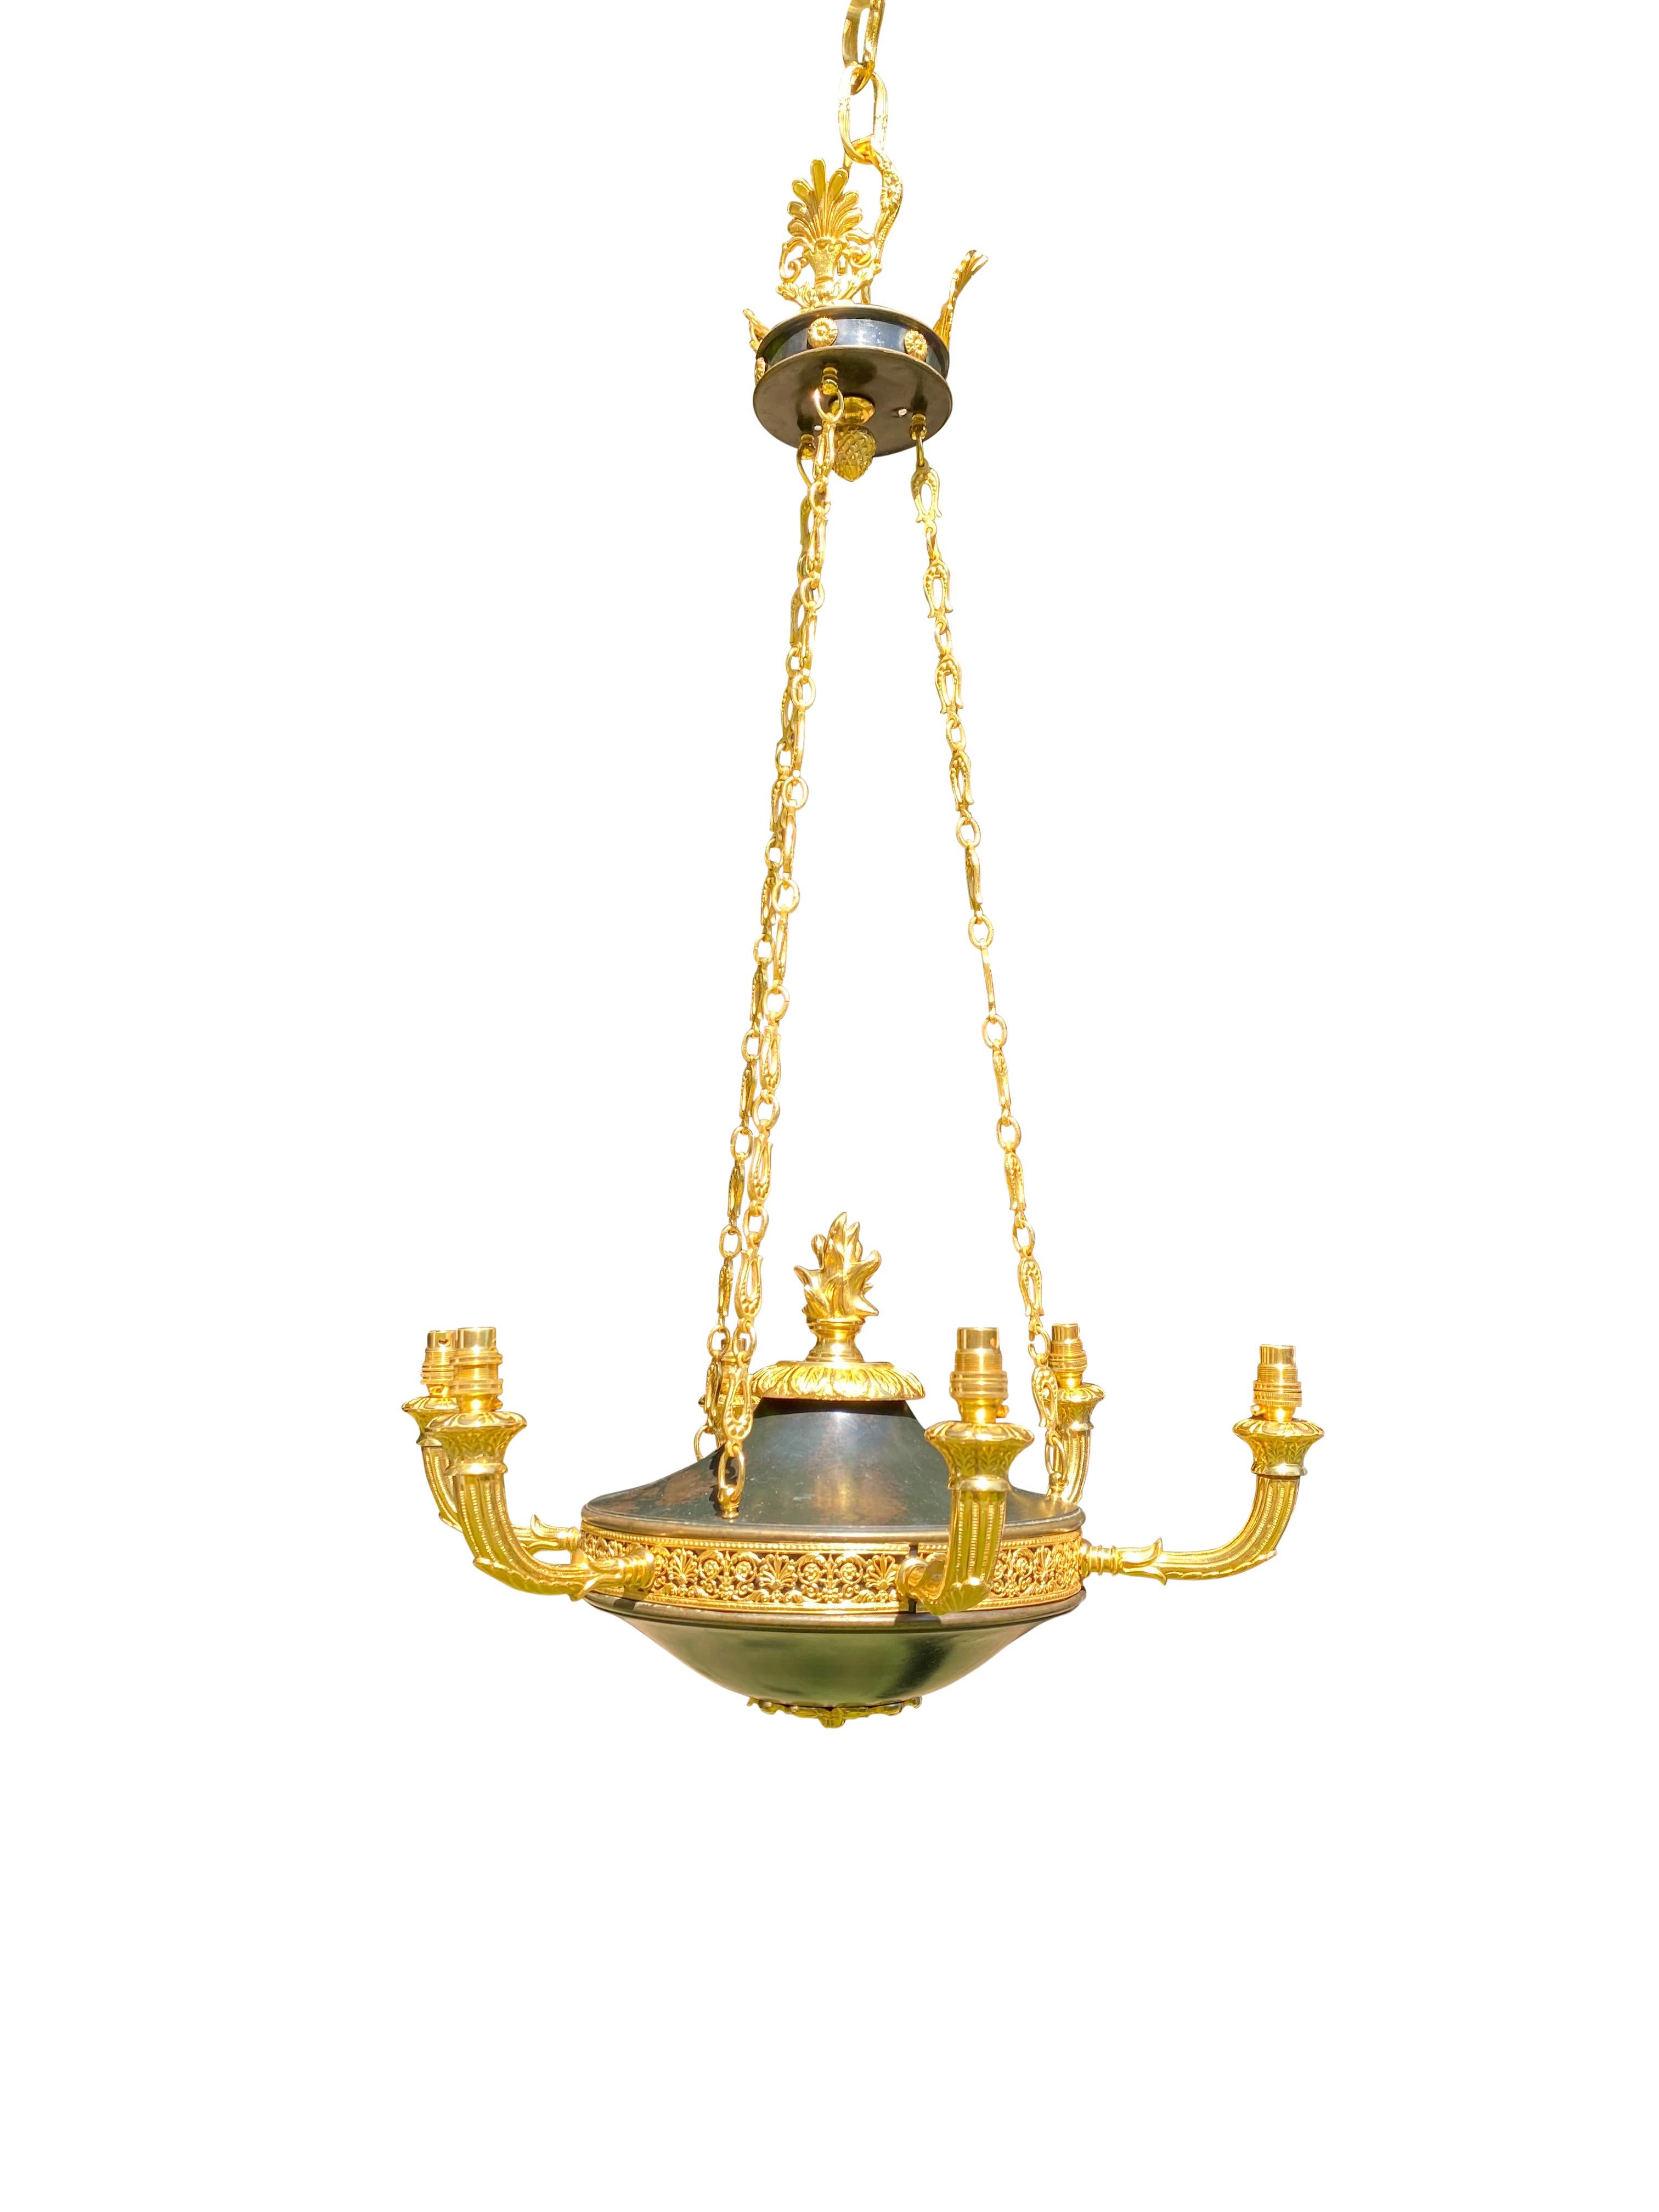 19th Century French Empire Chandelier For Sale 11